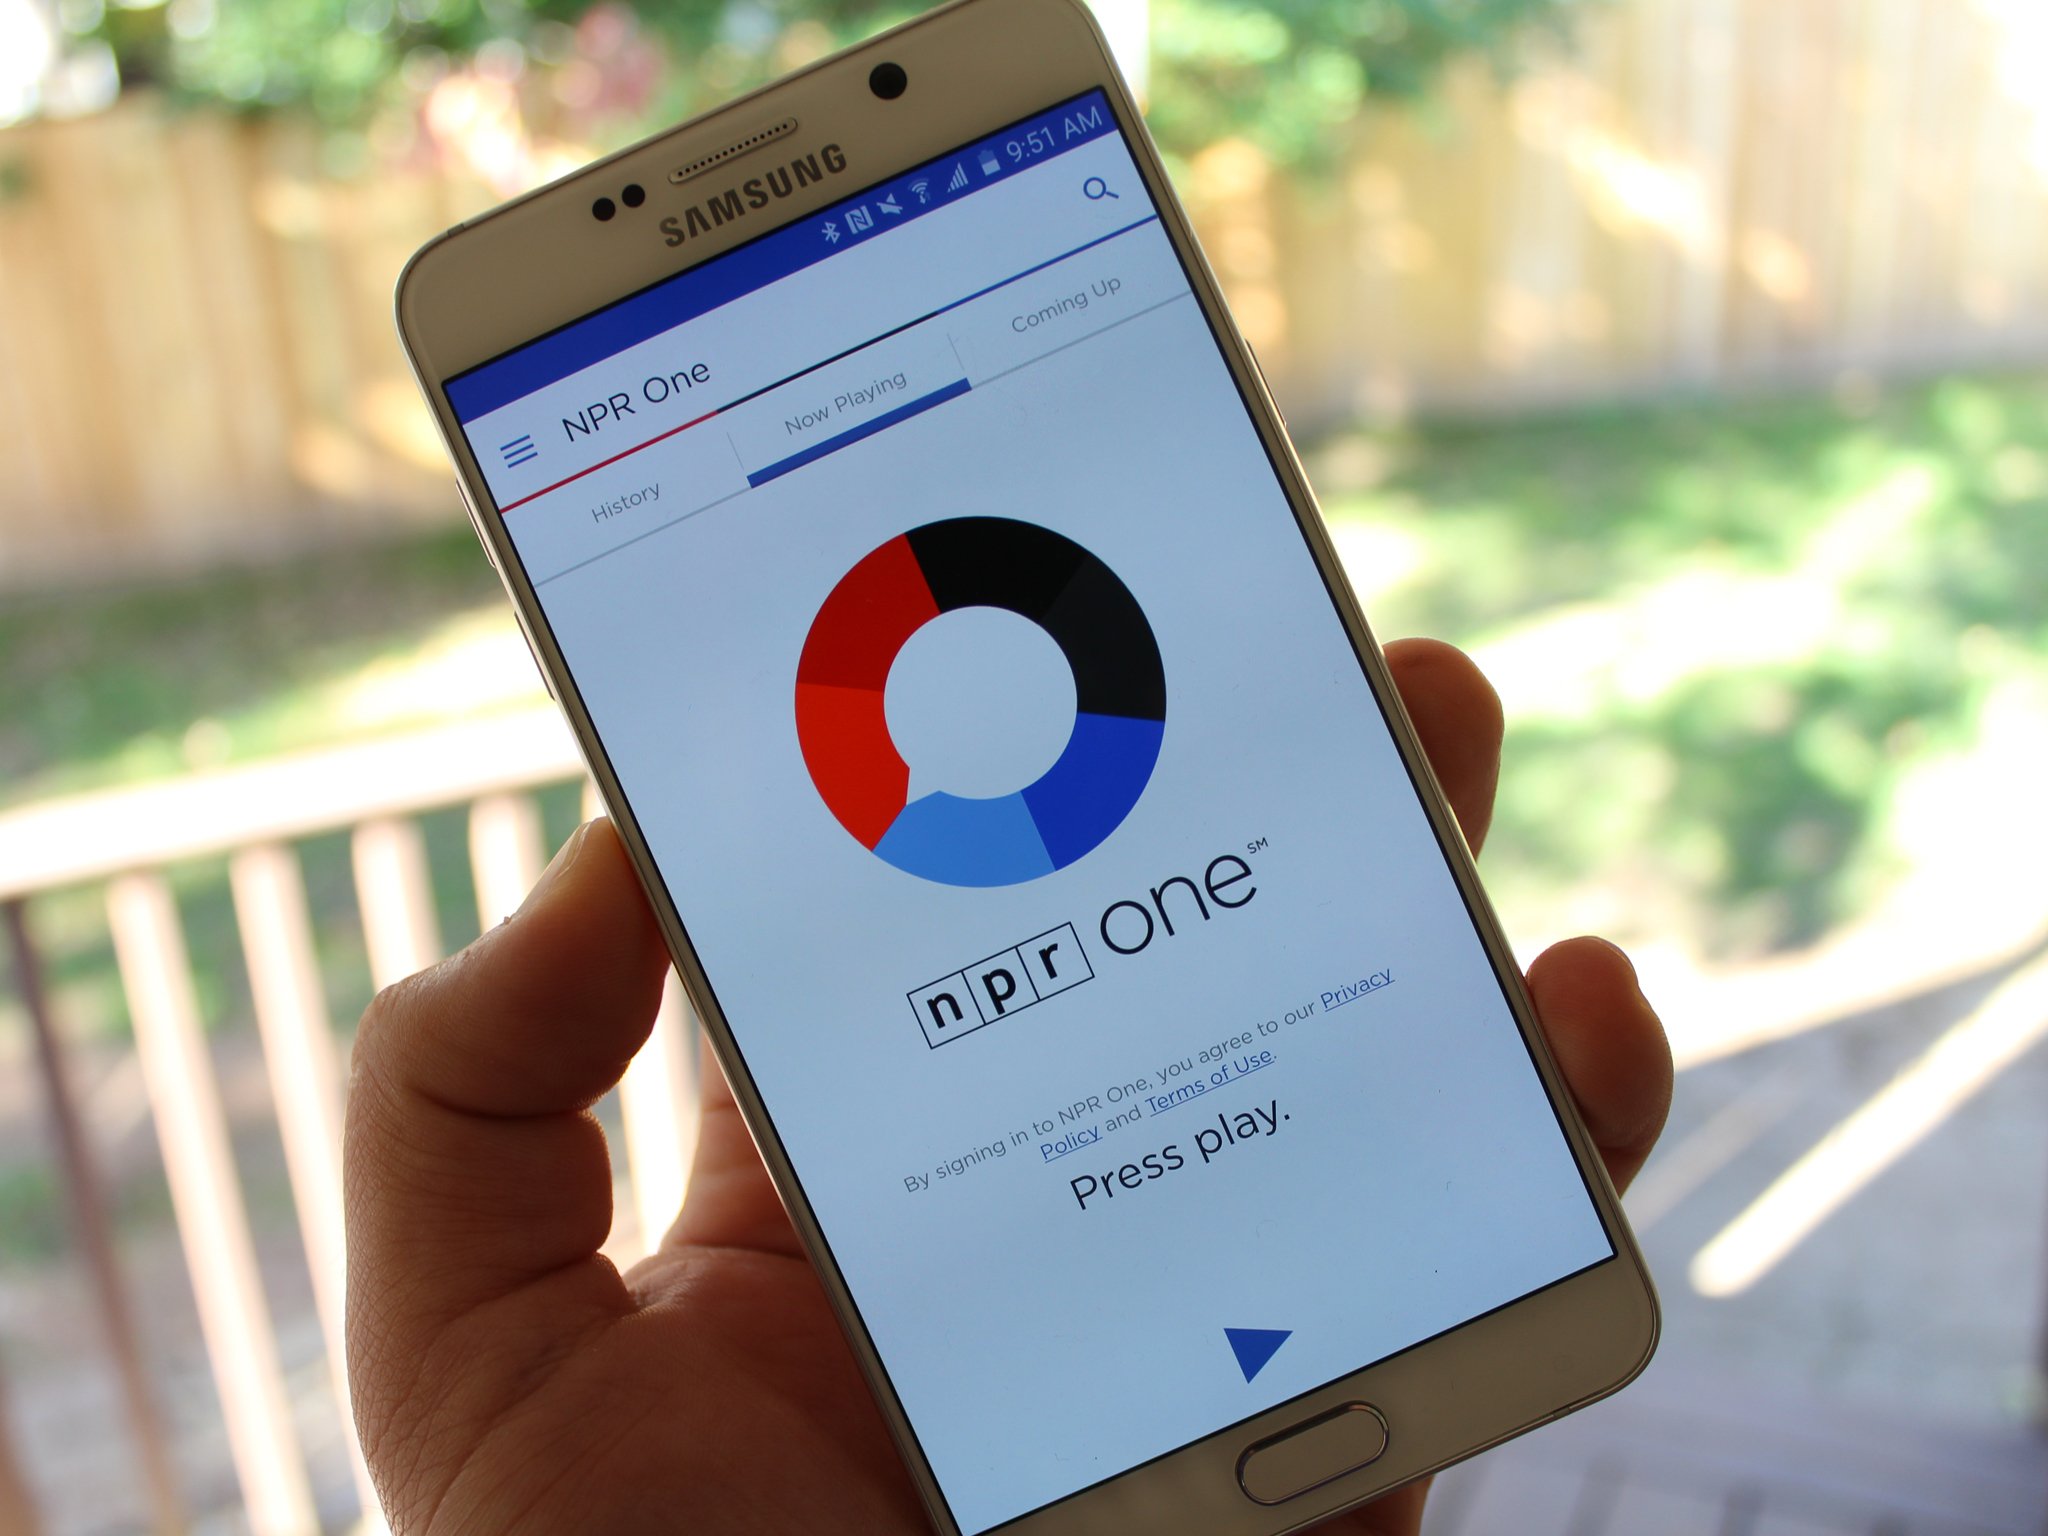 NPR One for Android is now MirrorLink compatible